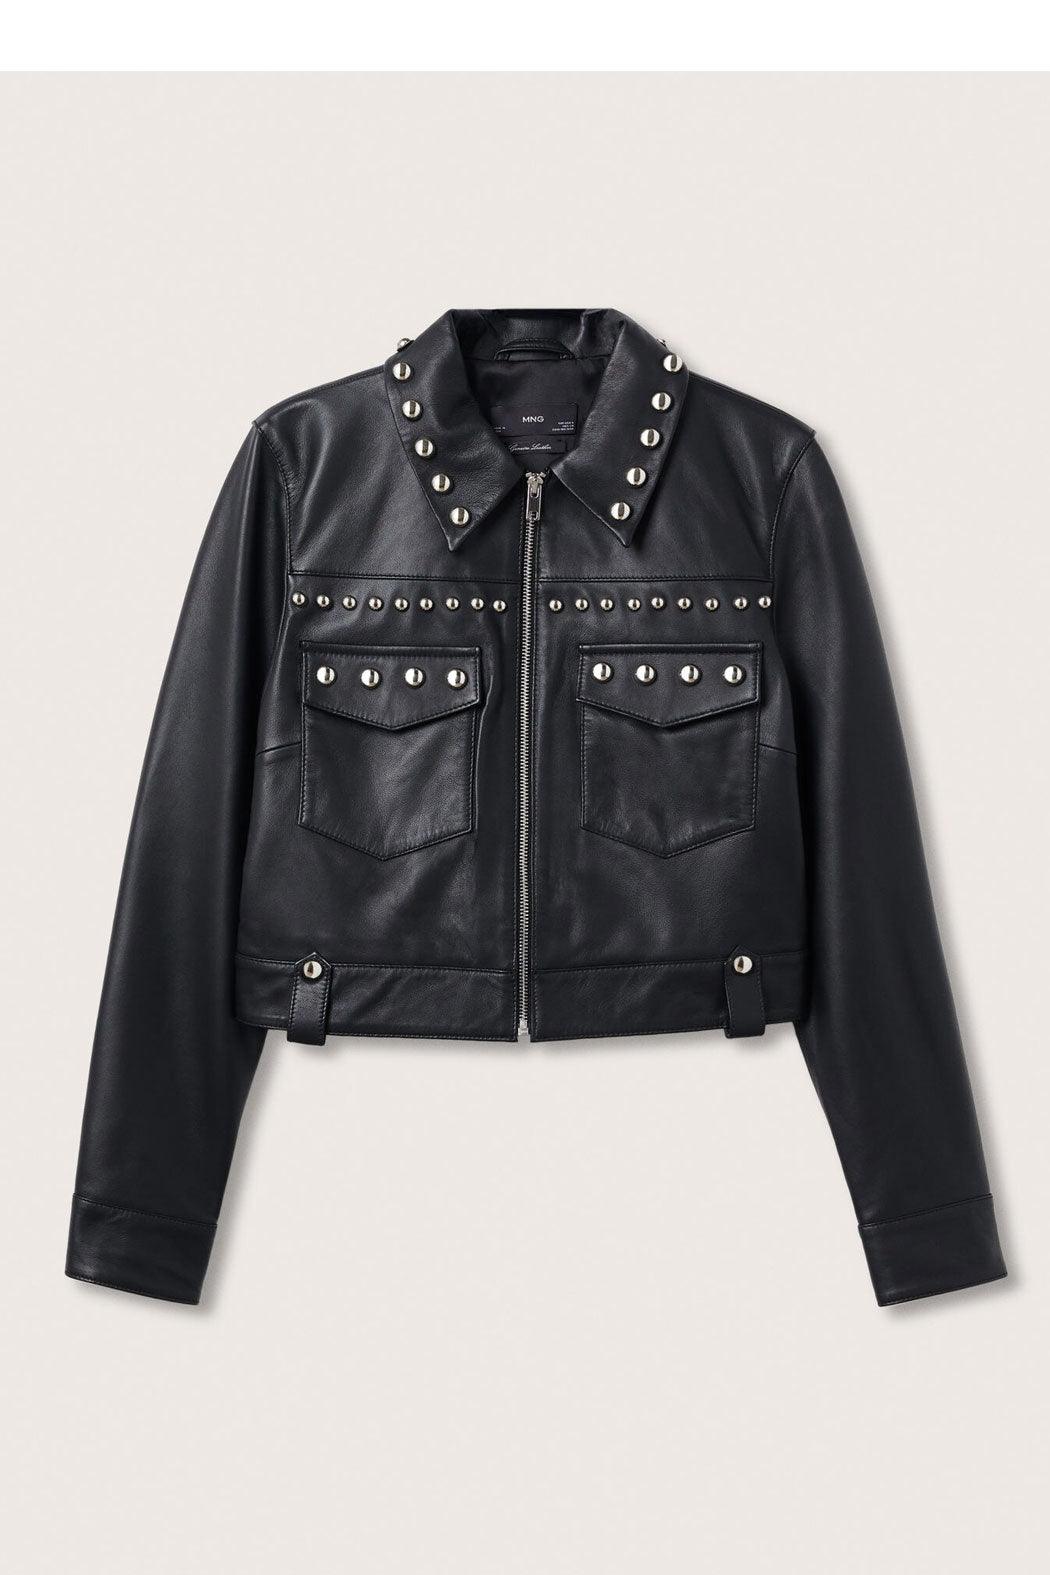 Black Women style Silver Spiked Studded Retro Motorcycle Leather Jacket